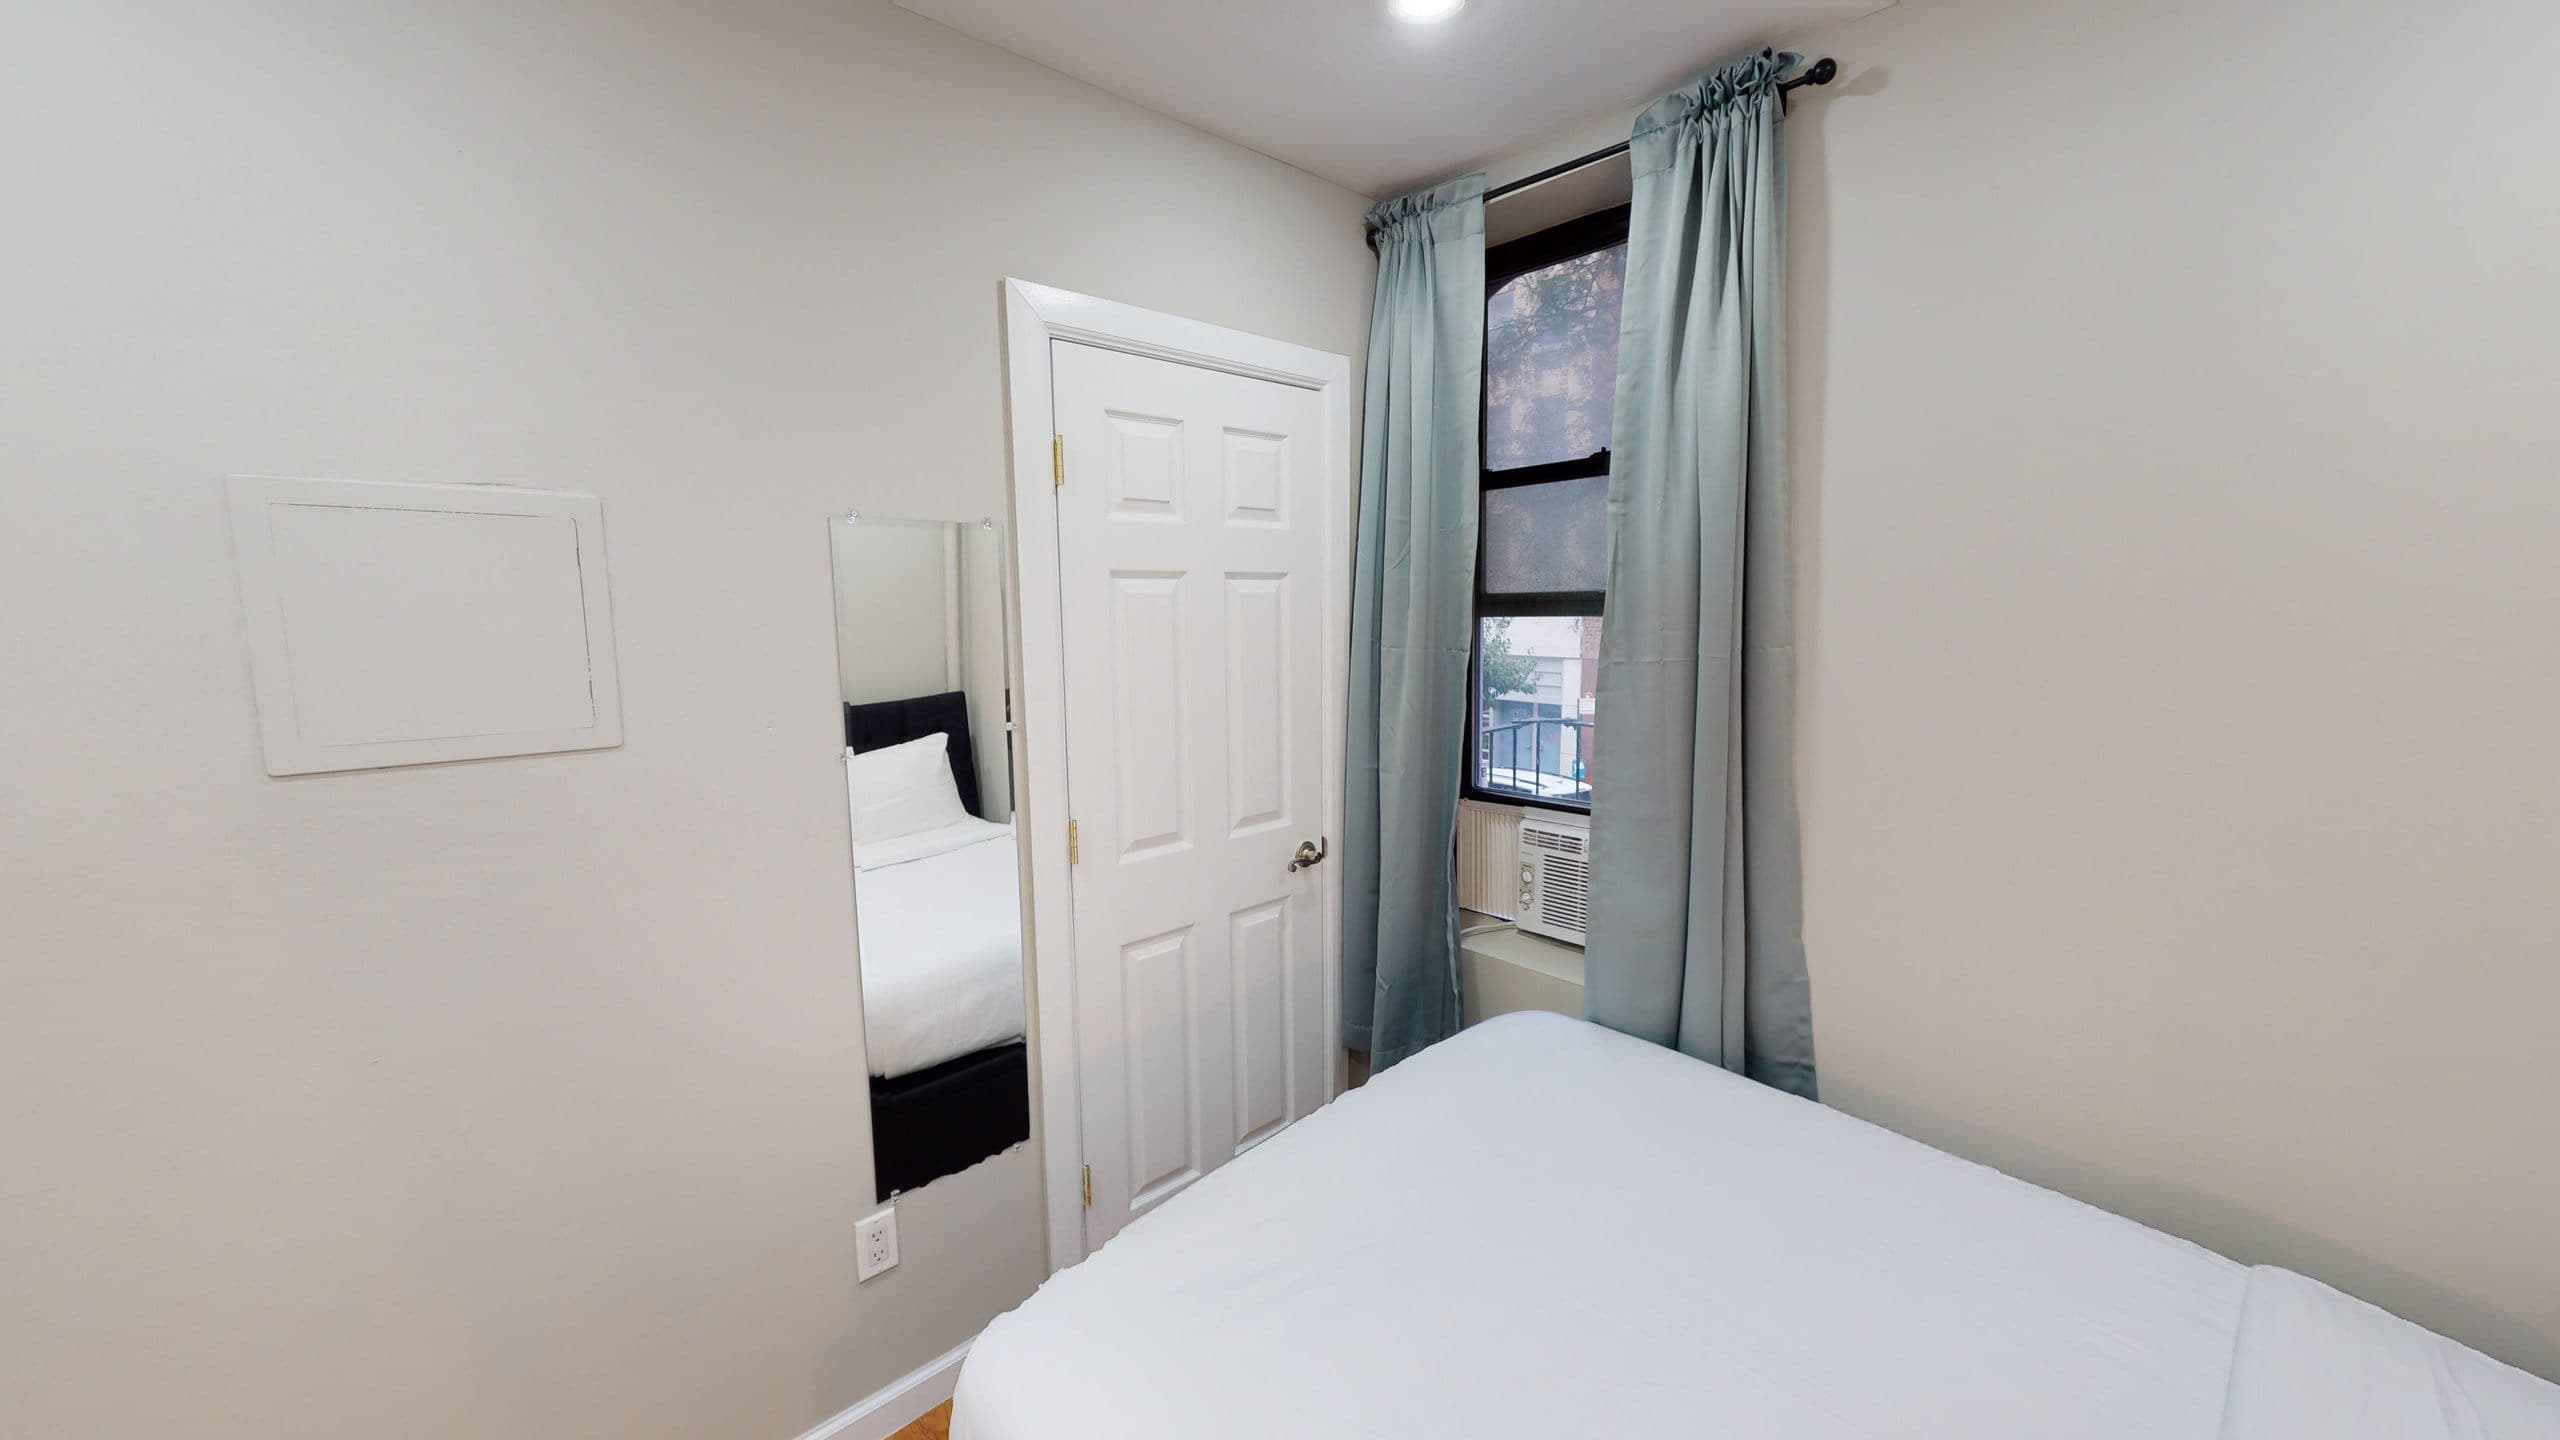 Photo 7 of #1533: Full Bedroom A at June Homes